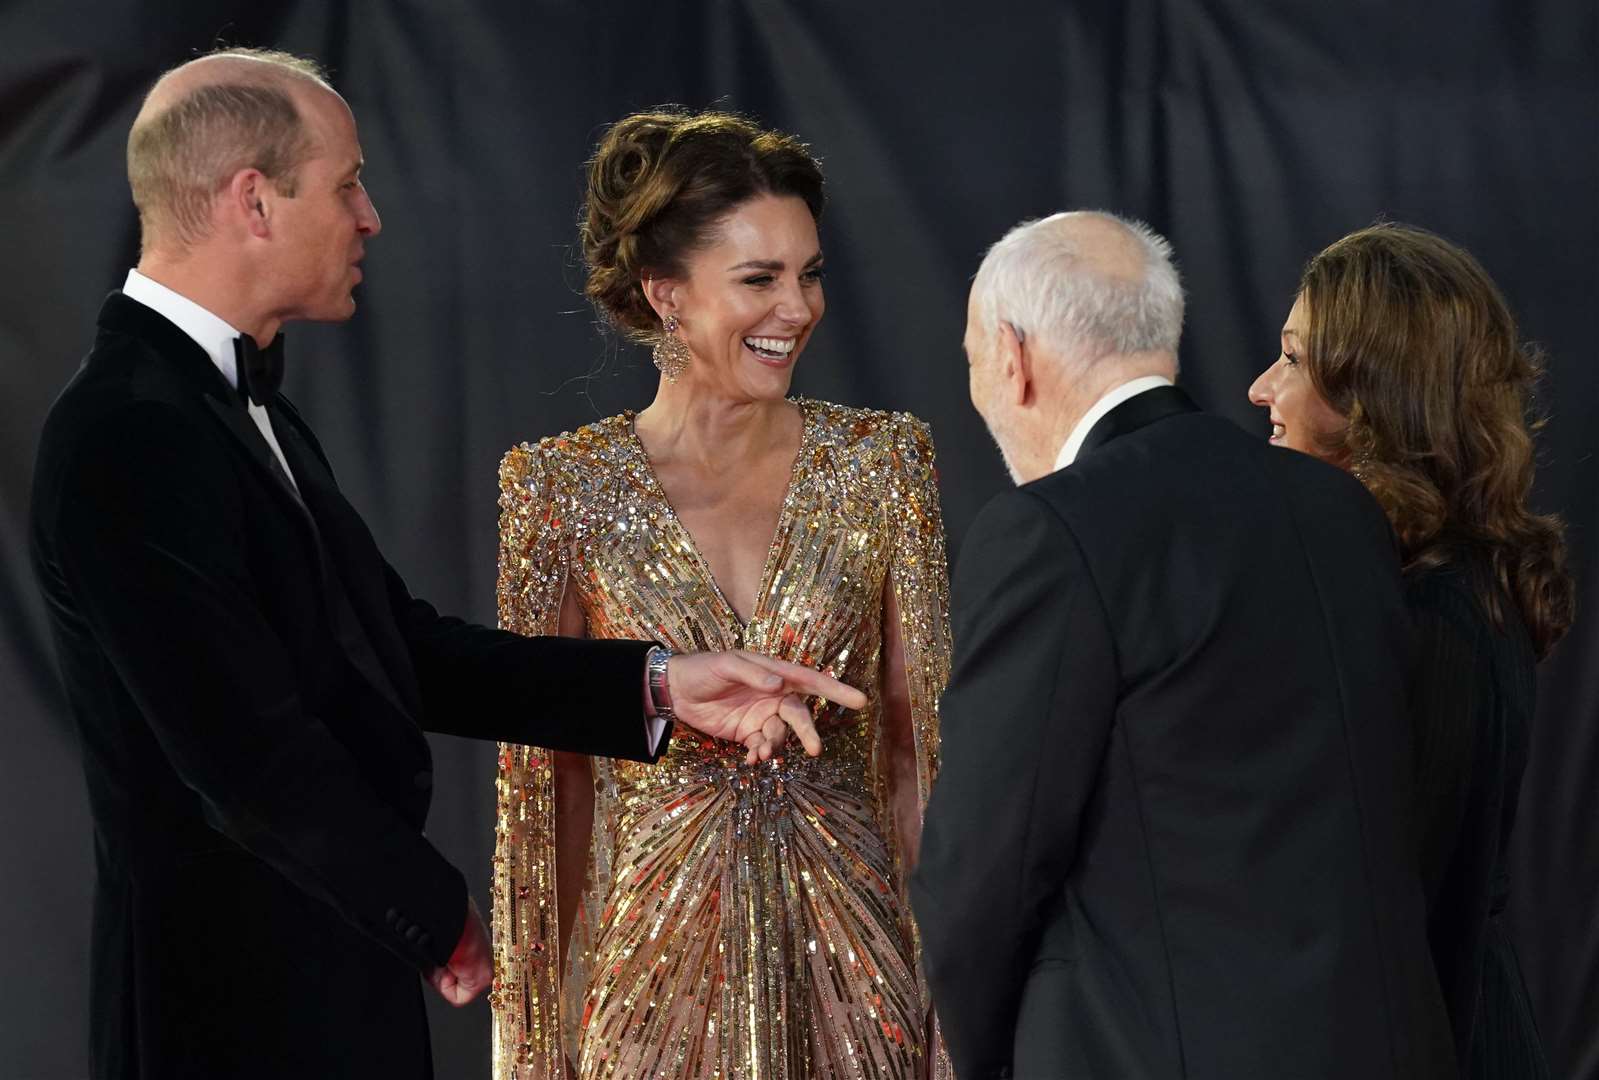 The Duke and Duchess of Cambridge are greeted by Barbara Broccoli (right) and Michael G. Wilson (second right) (Jonathan Brady/PA)